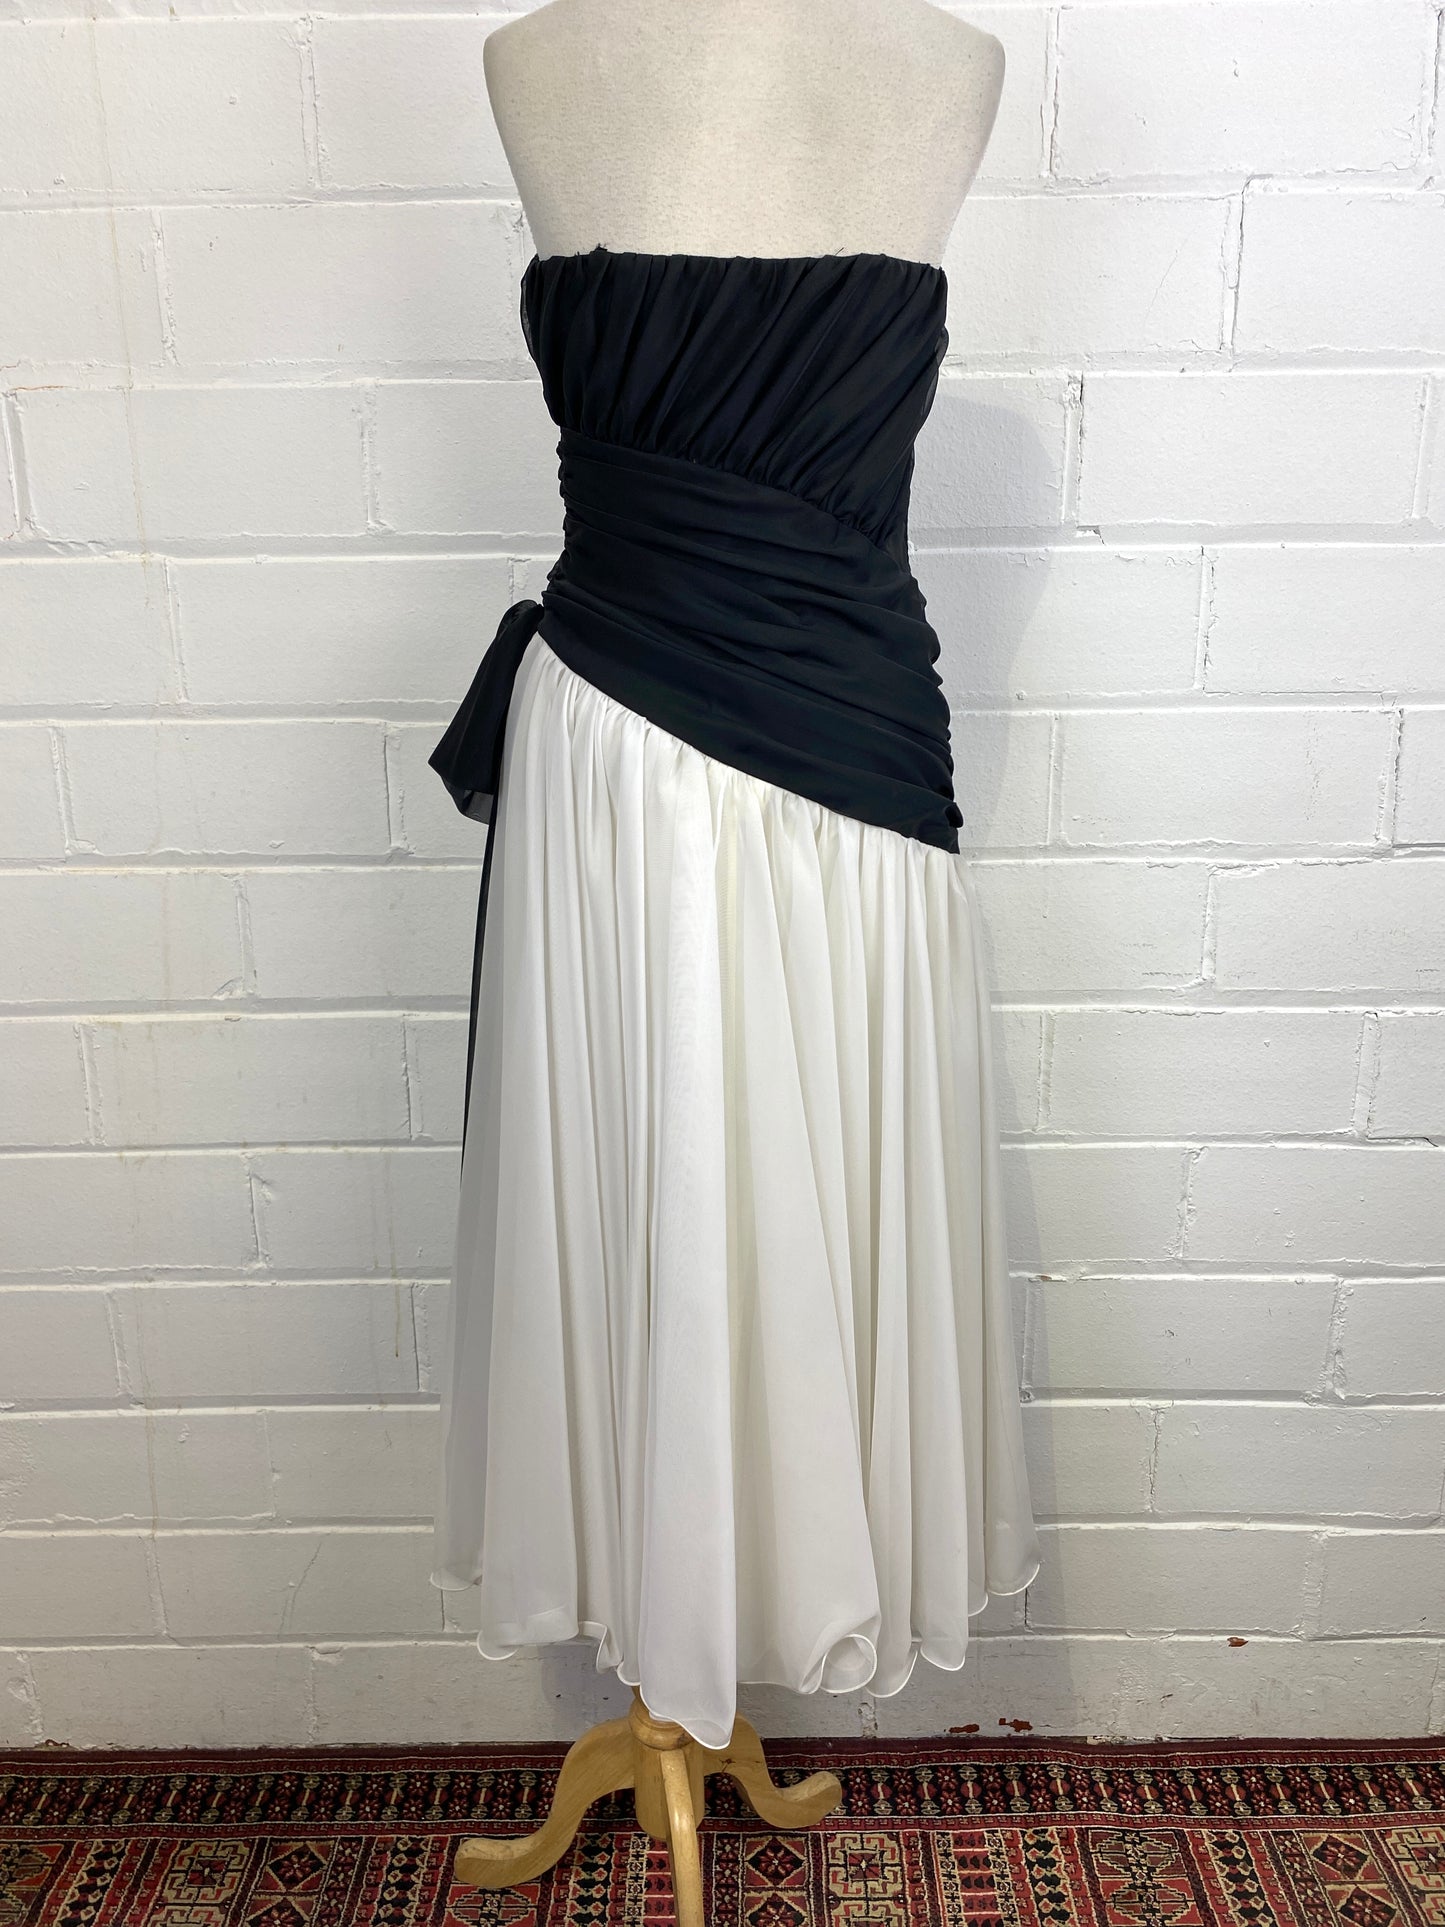 1980s cocktail dress black and white chiffon with bow on the side, strapless vintage party dress frank usher